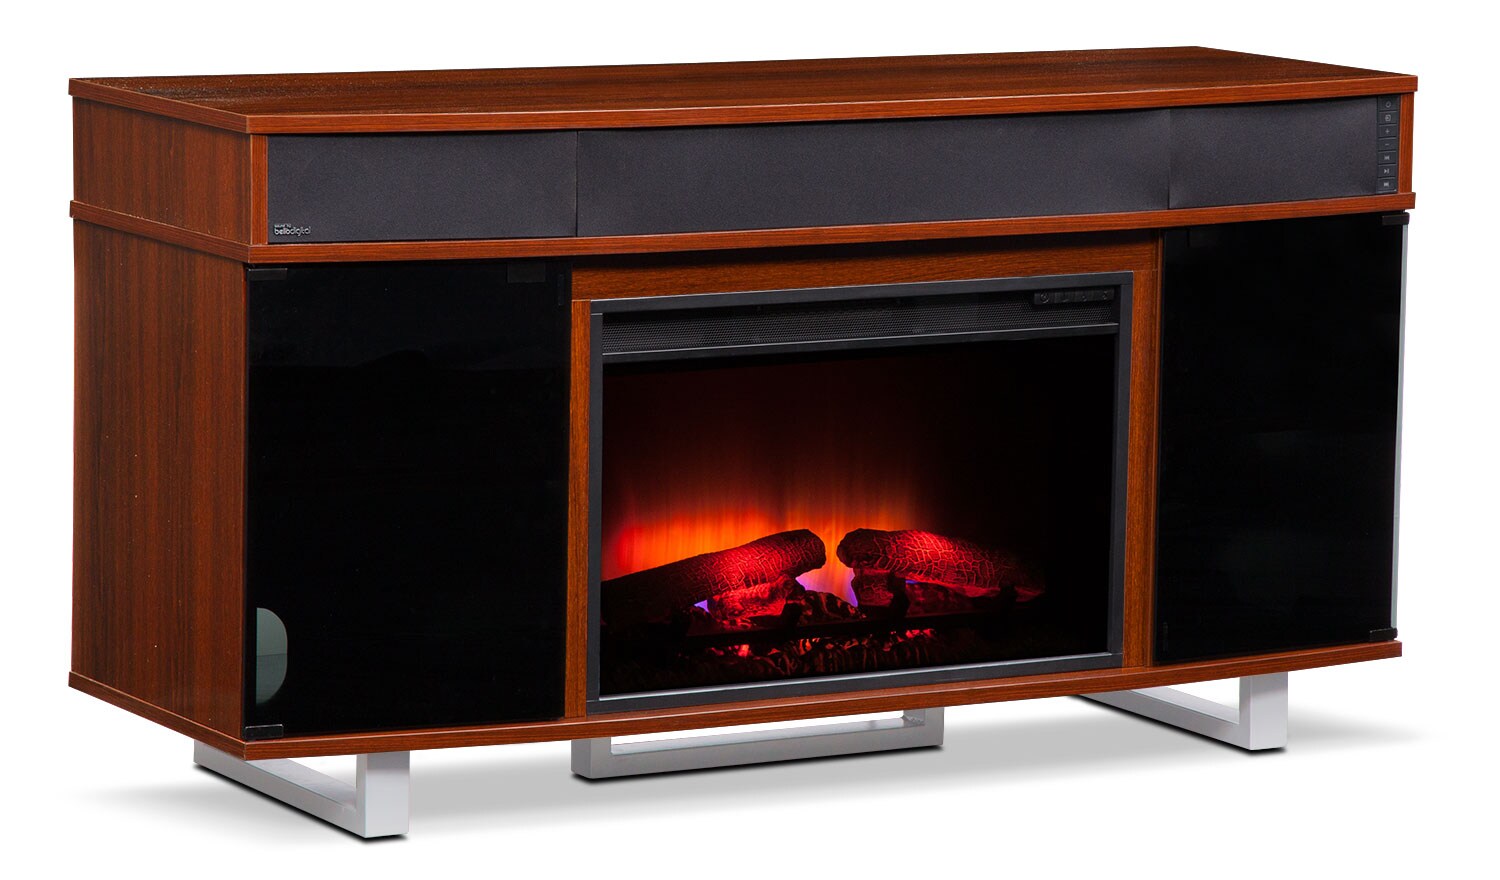 Pacer 56" Traditional Fireplace TV Stand with Sound Bar